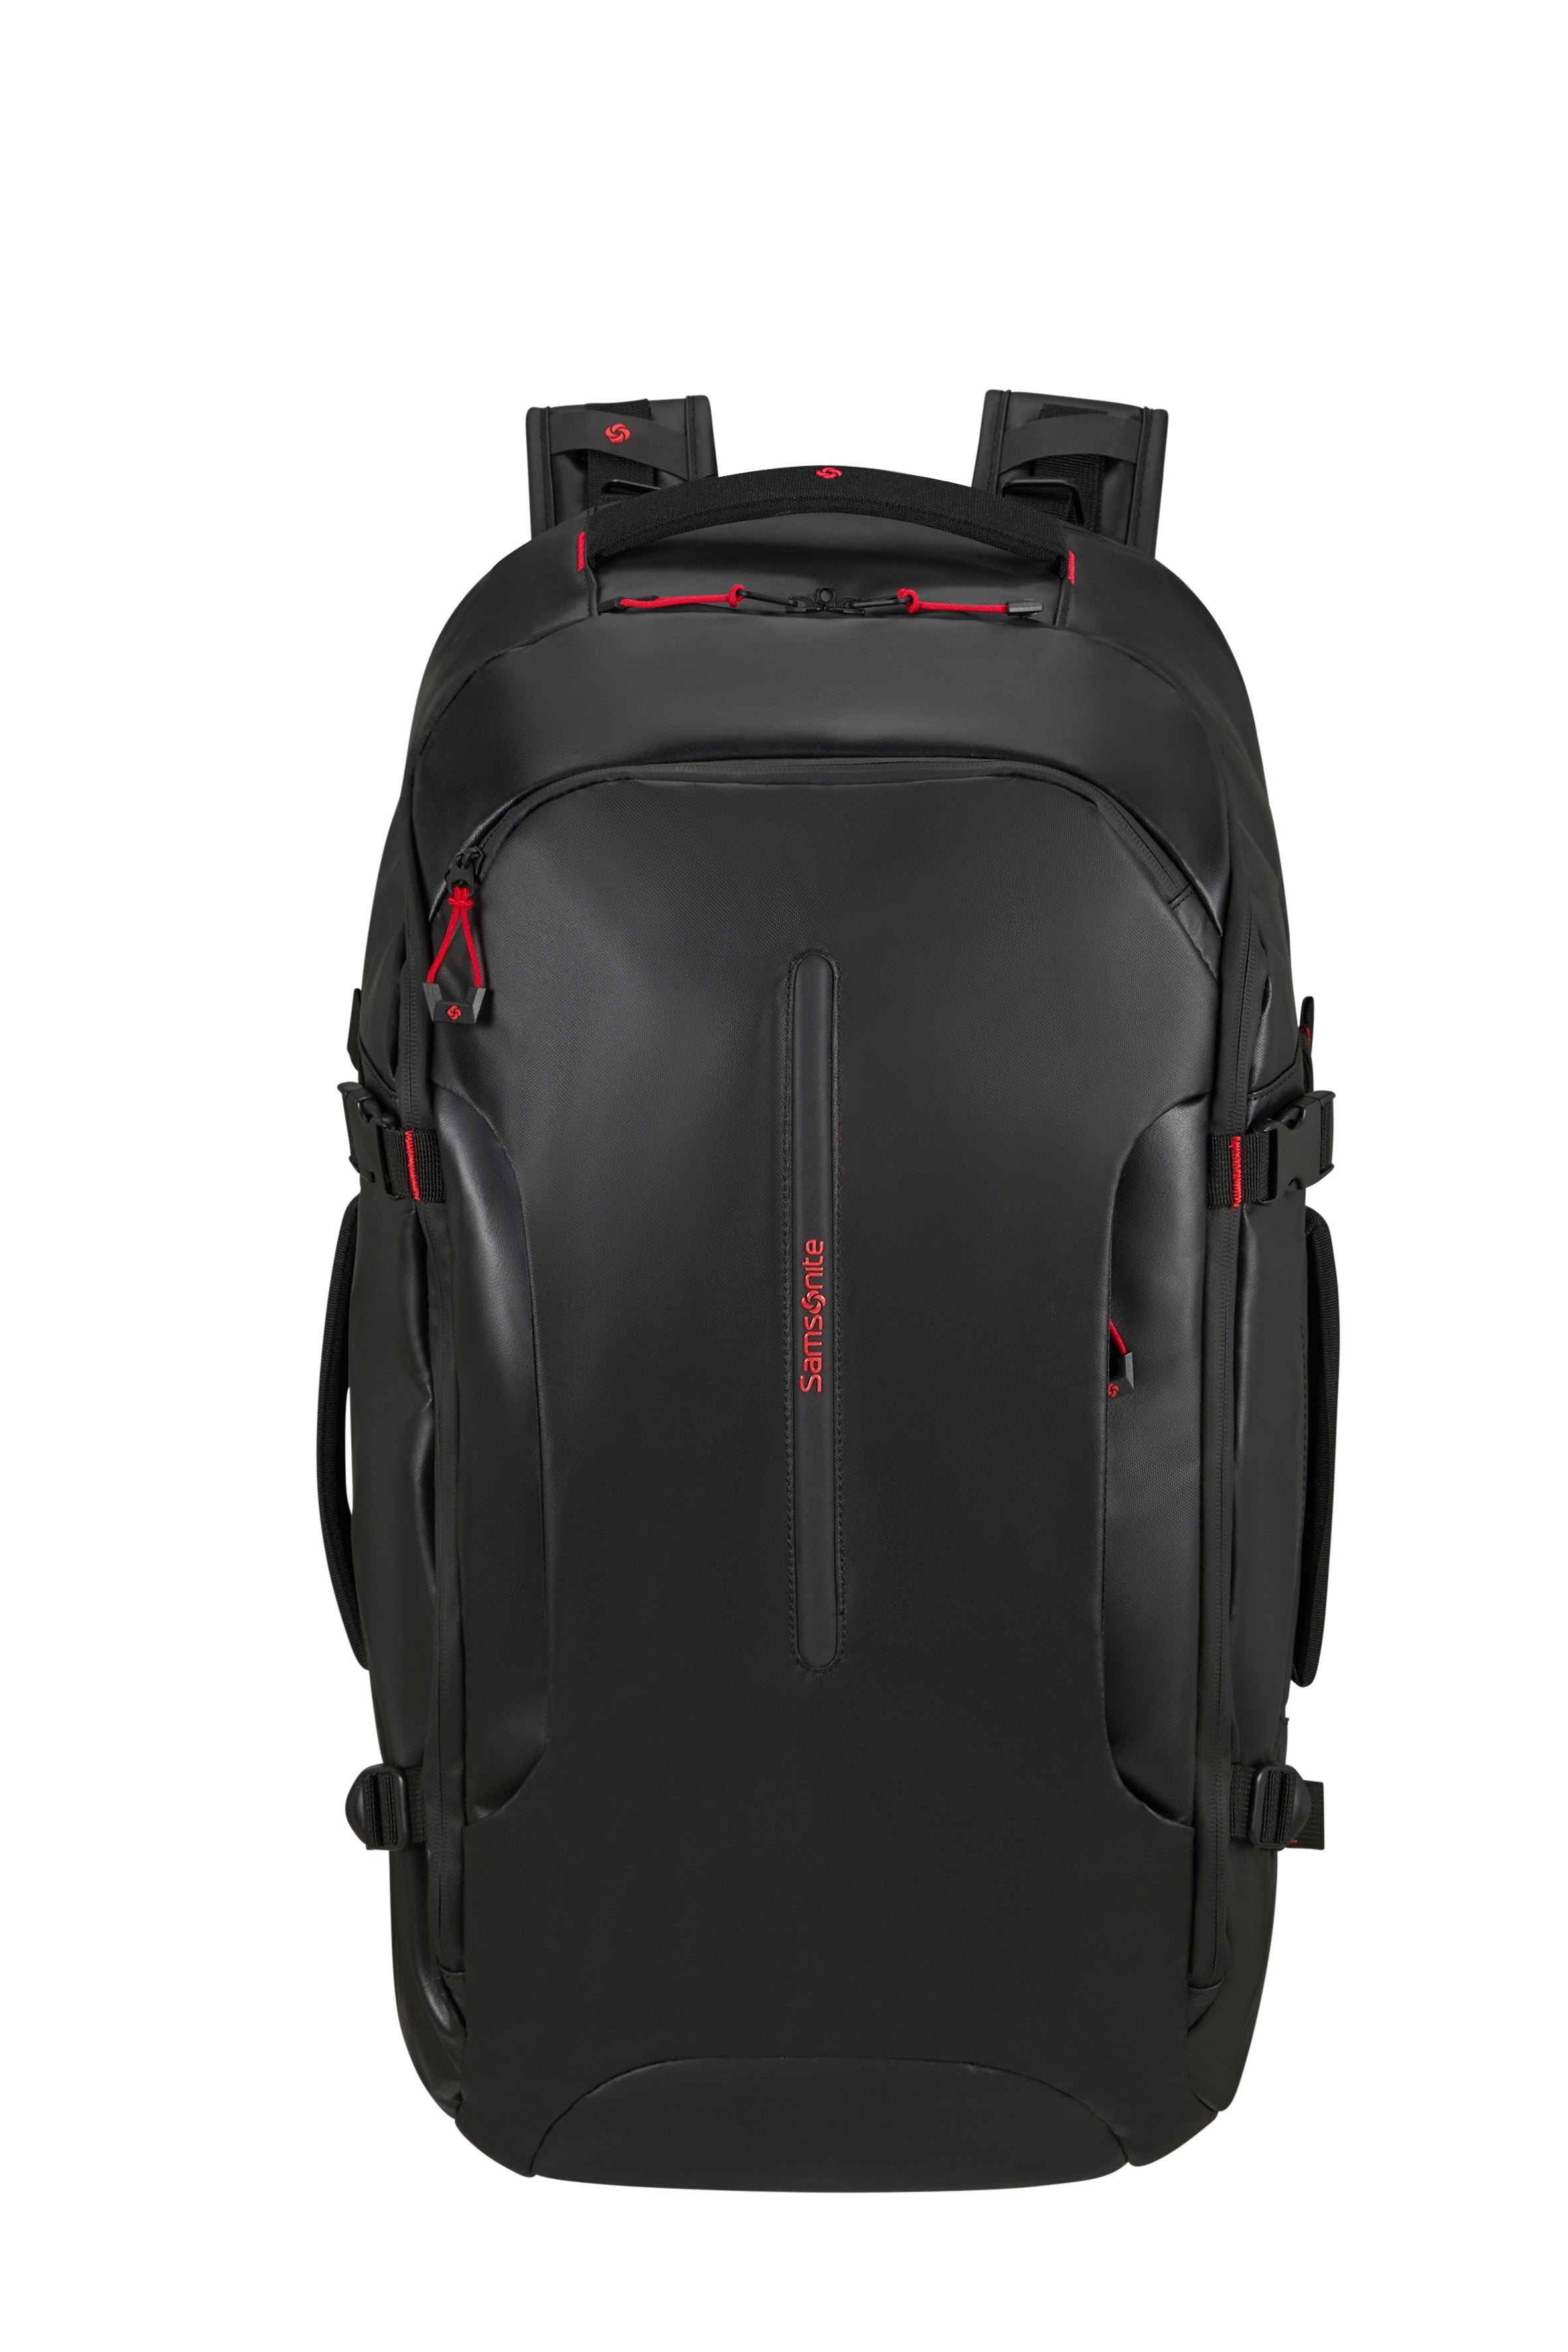 Ecodiver Travel Backpack S 17.3